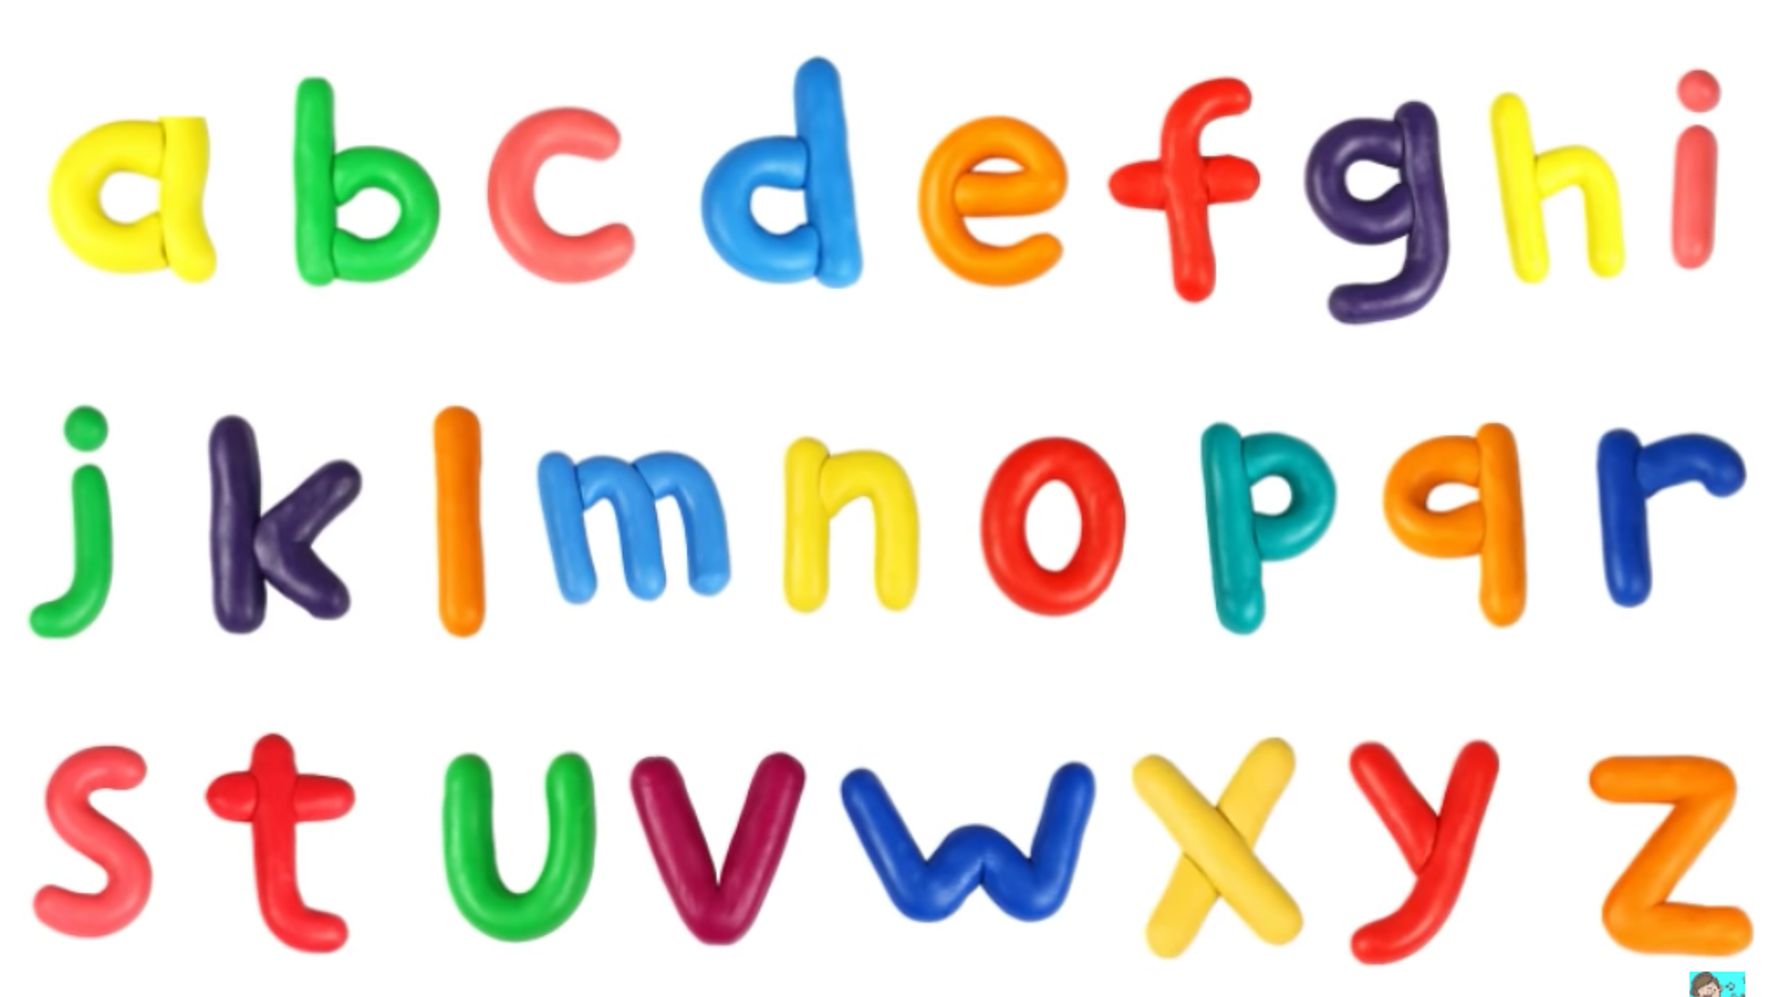 Why do most people say 'l-m-n-o-p' fast when saying the alphabet